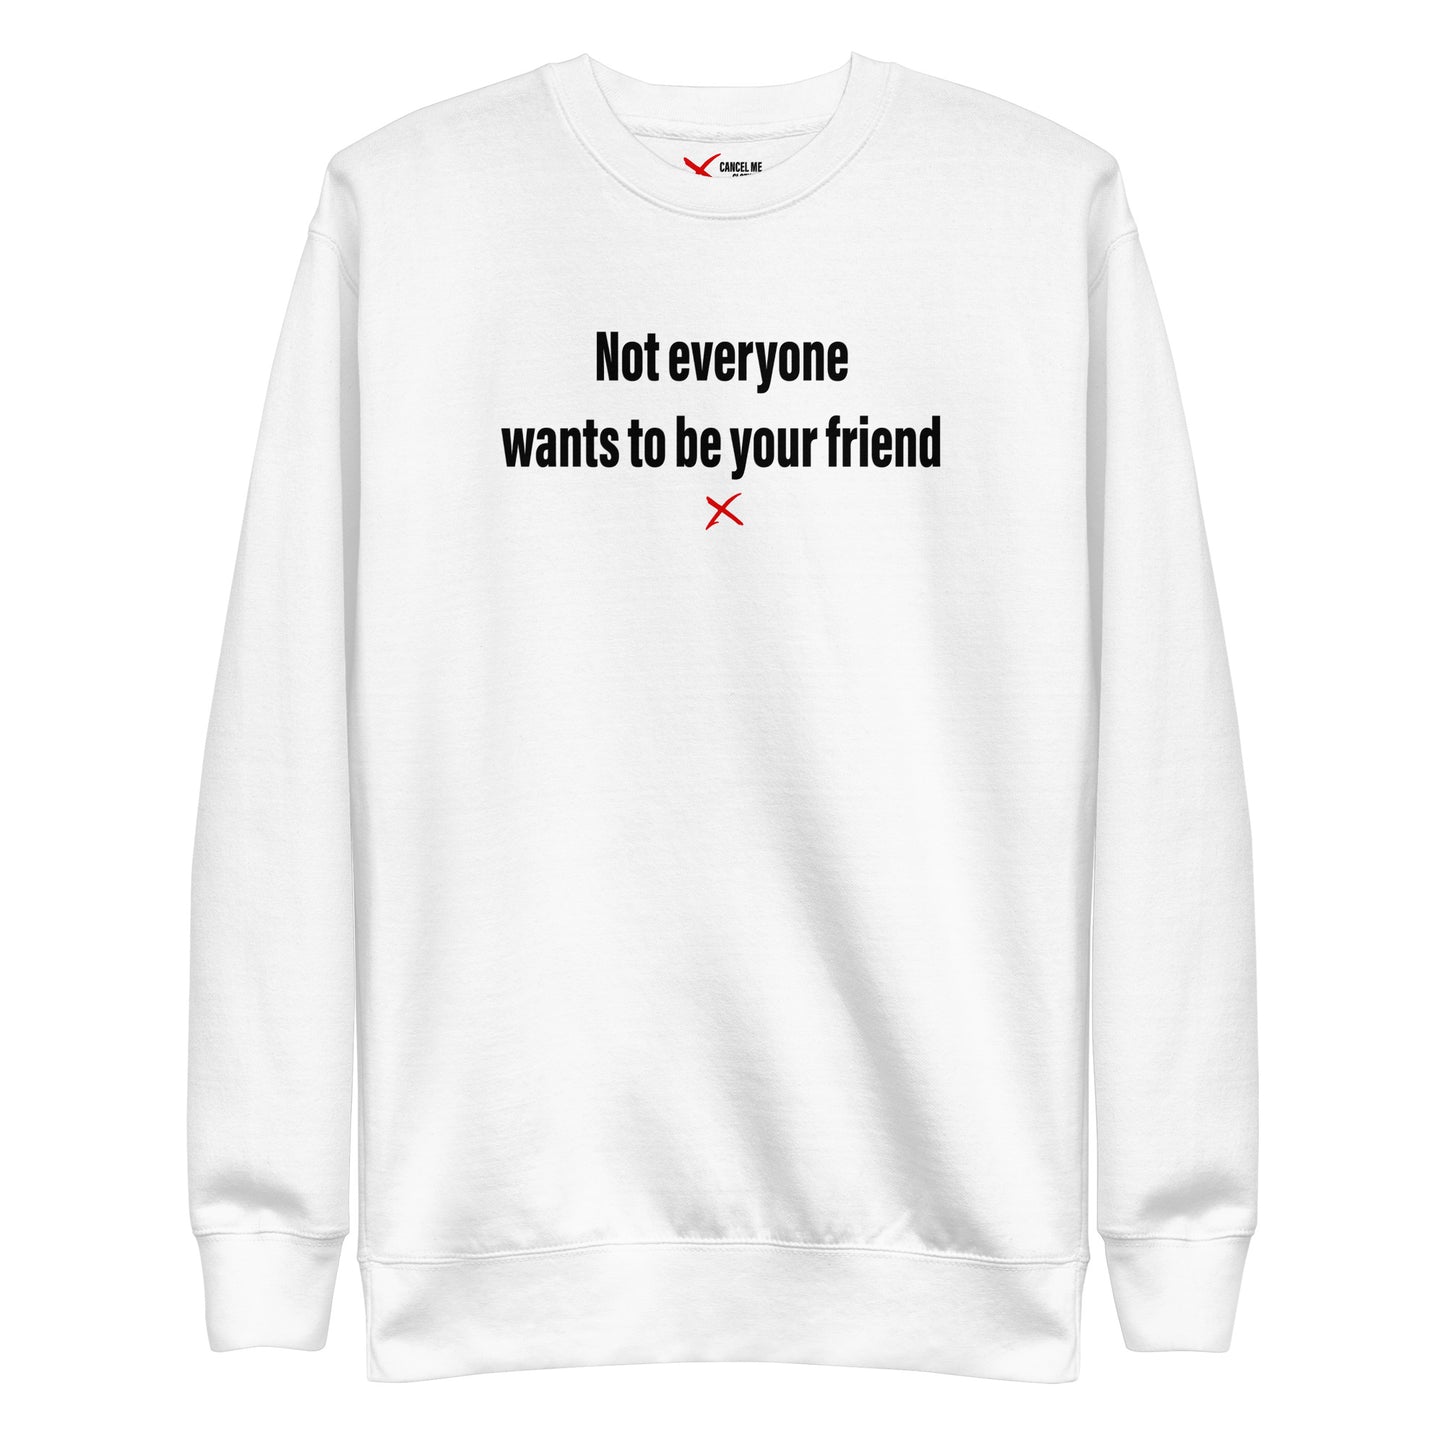 Not everyone wants to be your friend - Sweatshirt